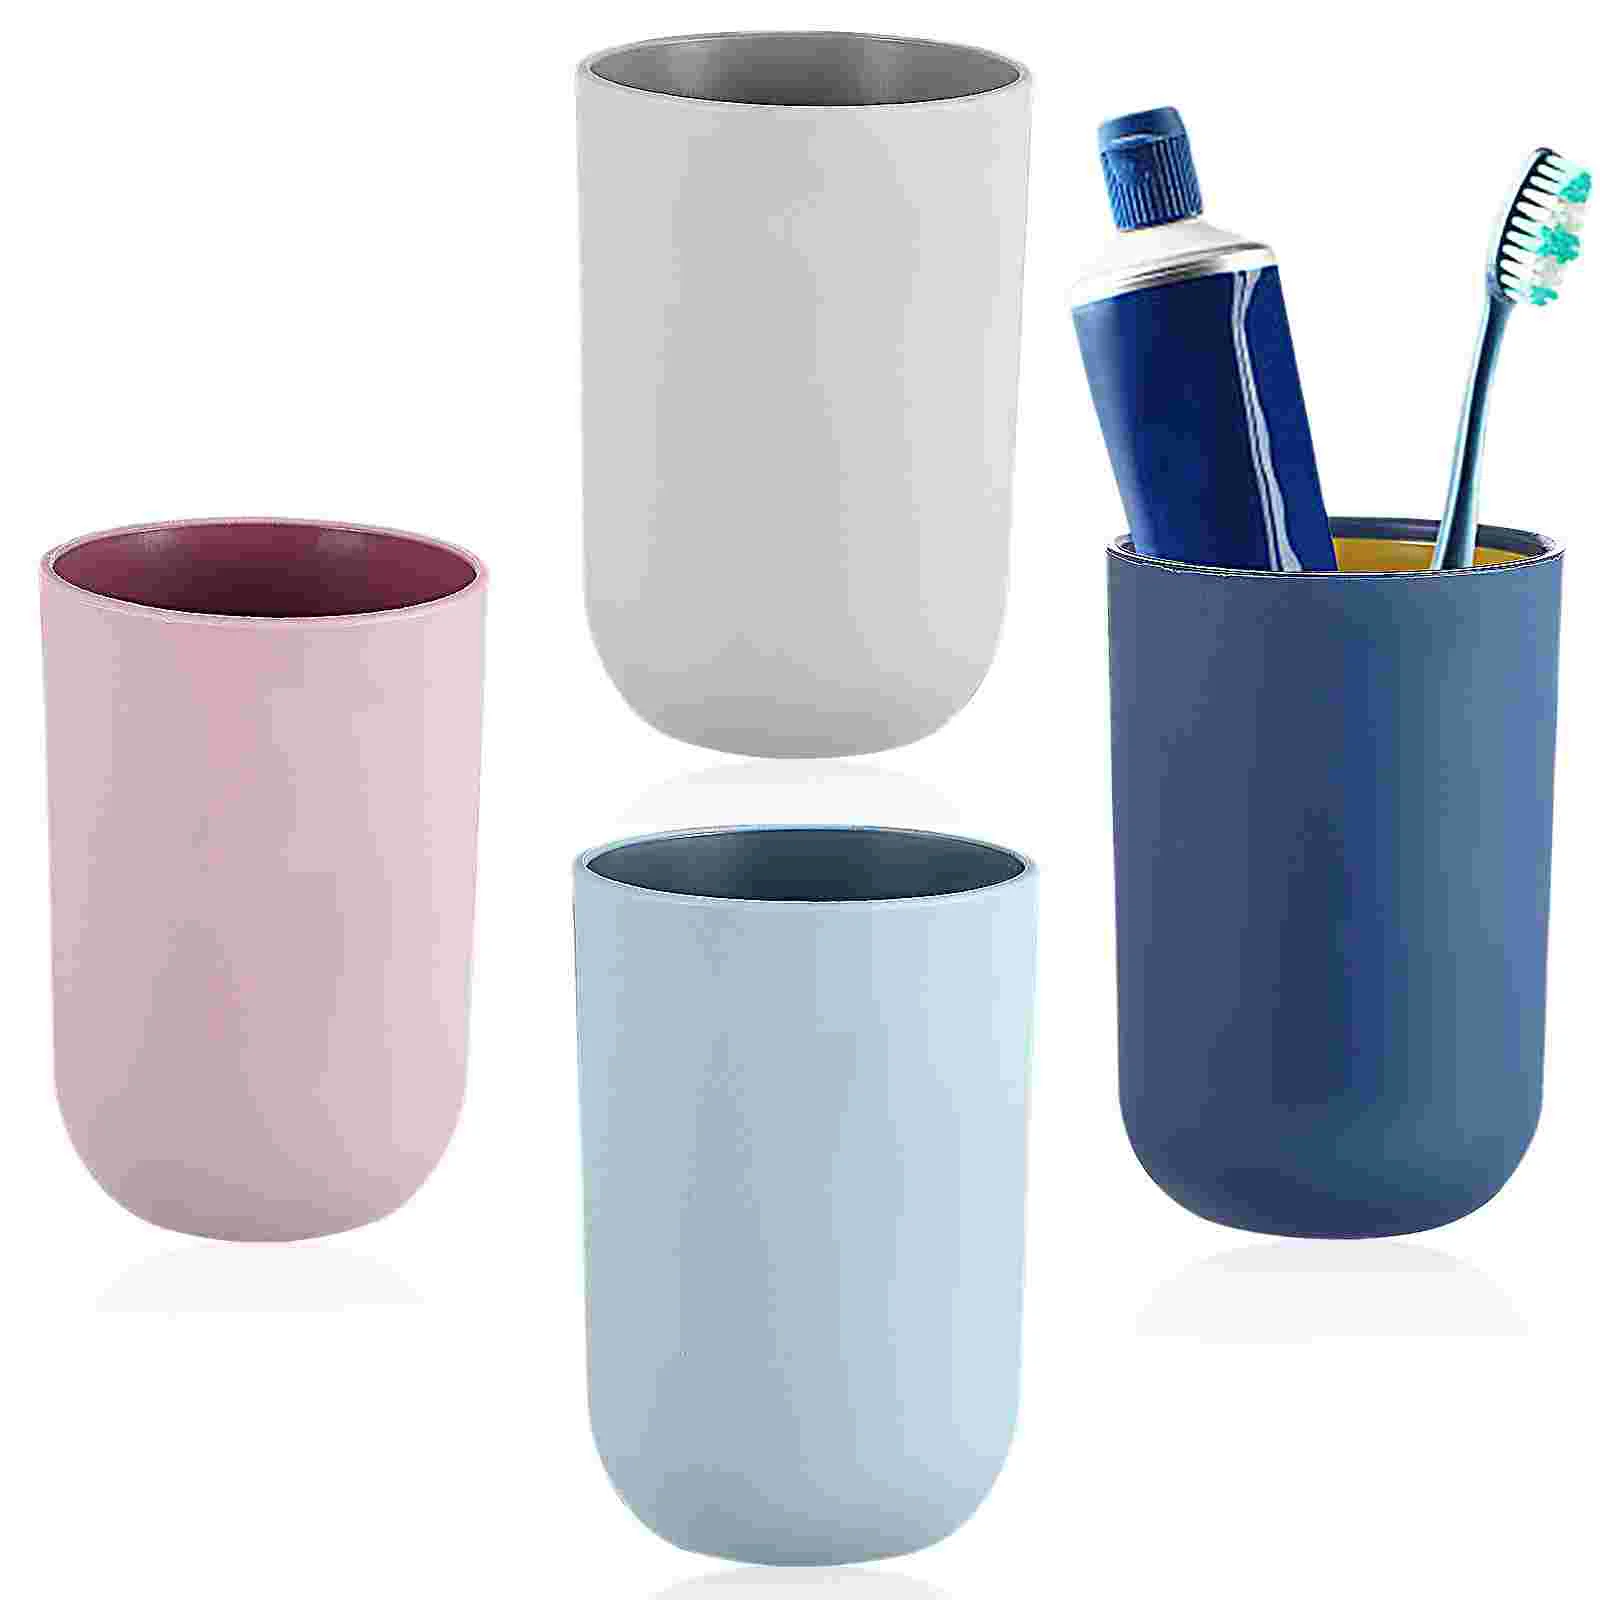 

Bathroom Cup Cups Tooth Tumbler Plastic Holder Tumblers Mugs Mug Mouthwash Brushing Organizer Travel Drinking Water Accessories